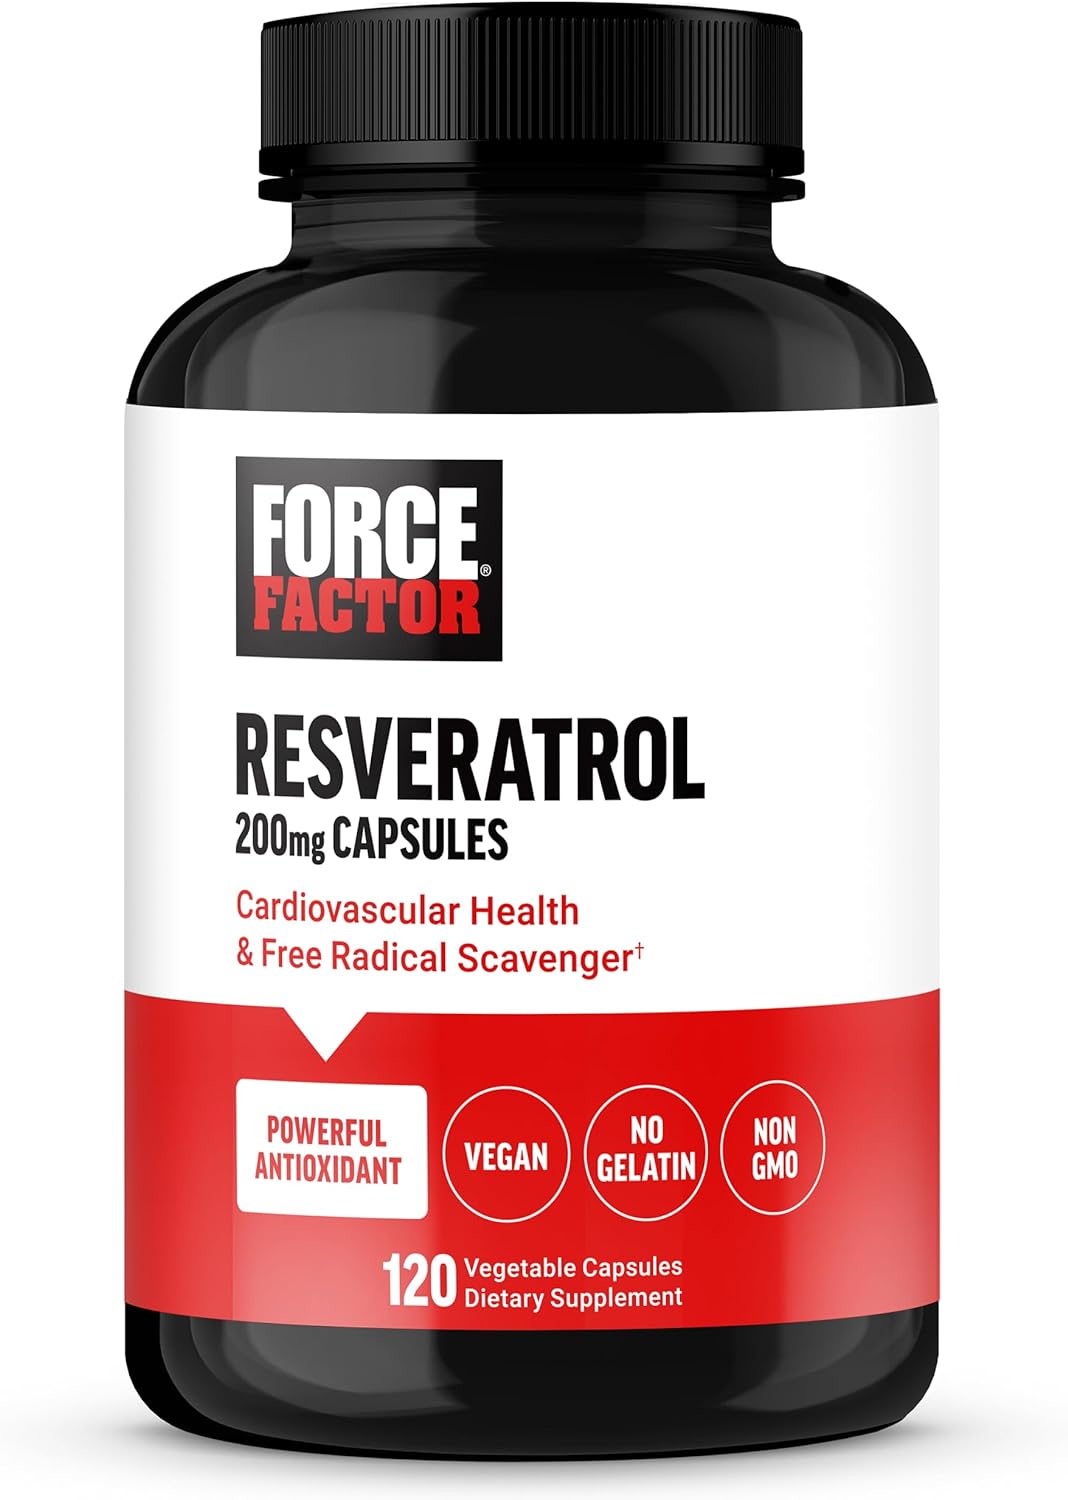 FORCE FACTOR Resveratrol Supplement to Support Heart Health, Antioxidants Supplement and Free Radical Scavenger Made with Japanese Knotweed, Vegan, Non-GMO, 120 Vegetable Capsules